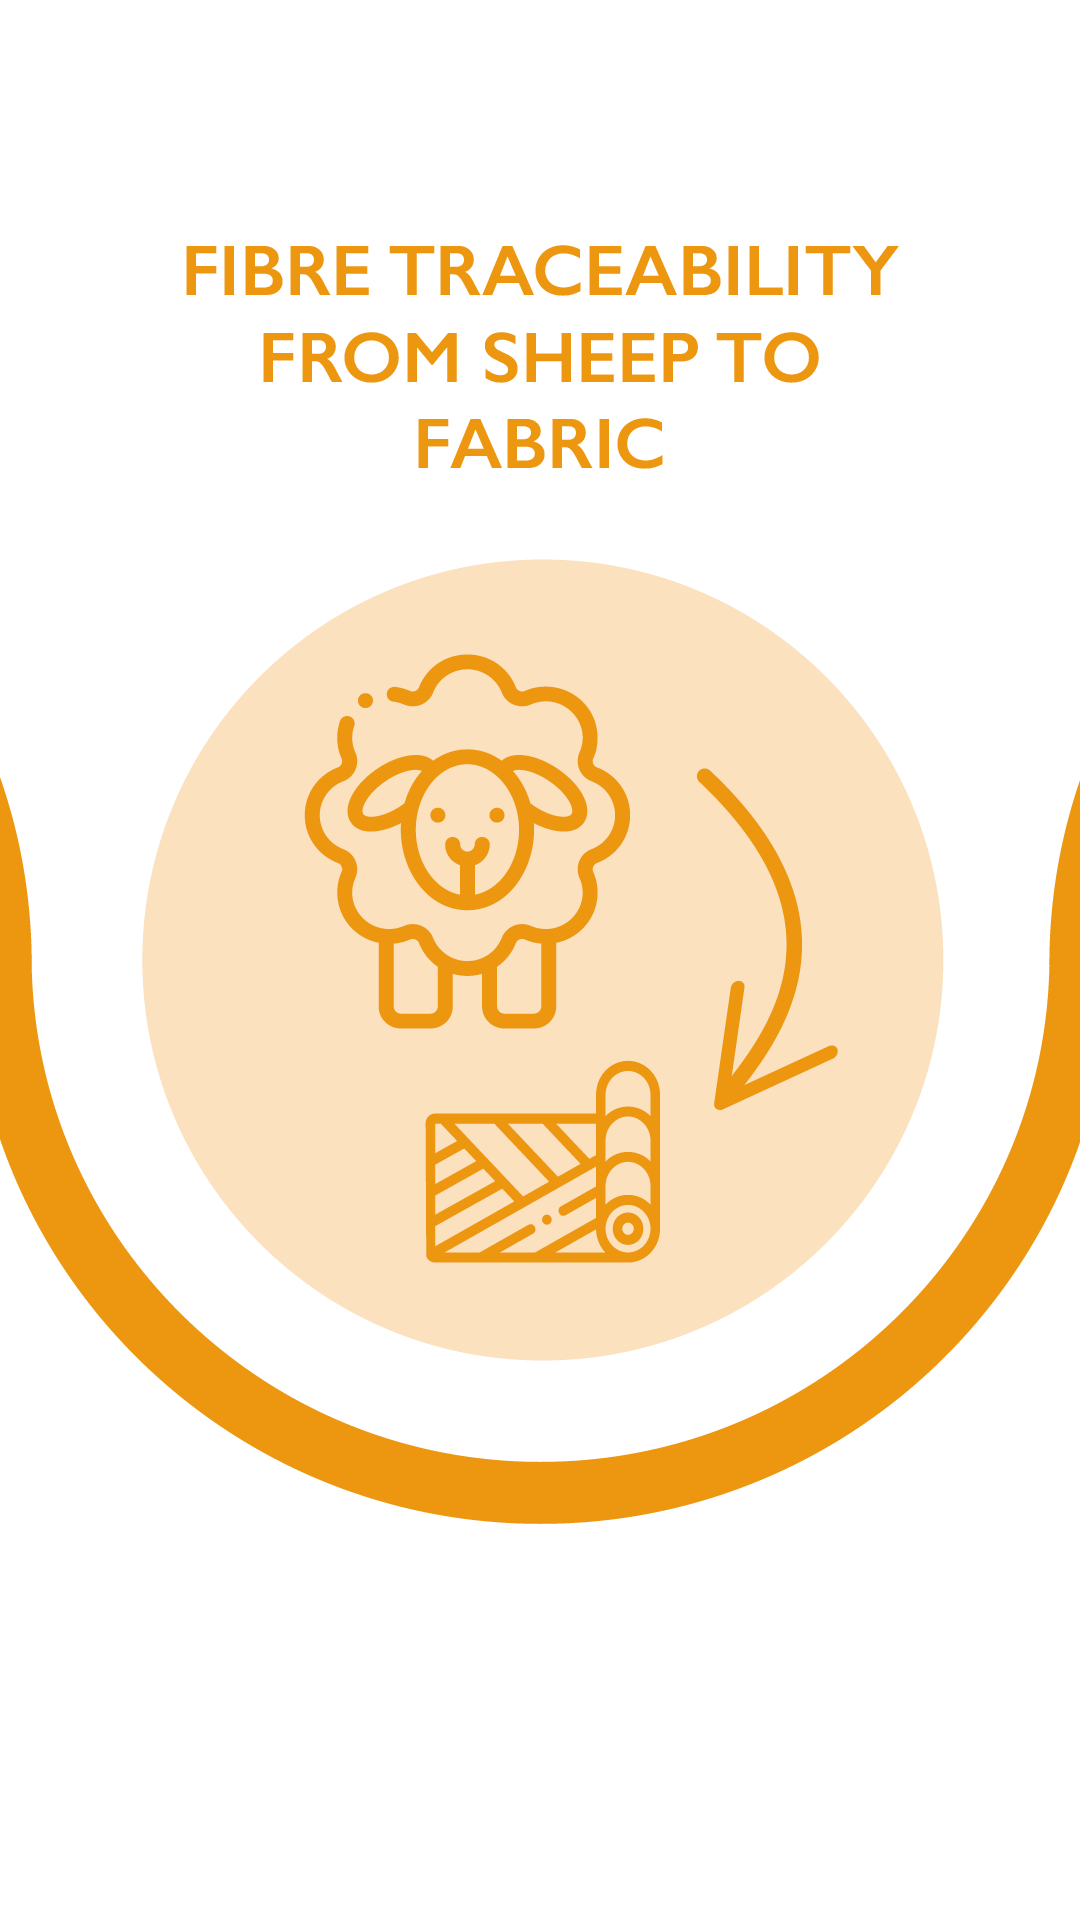 FIBRE TRACEABILITY FROM SHEEP TO FABRIC